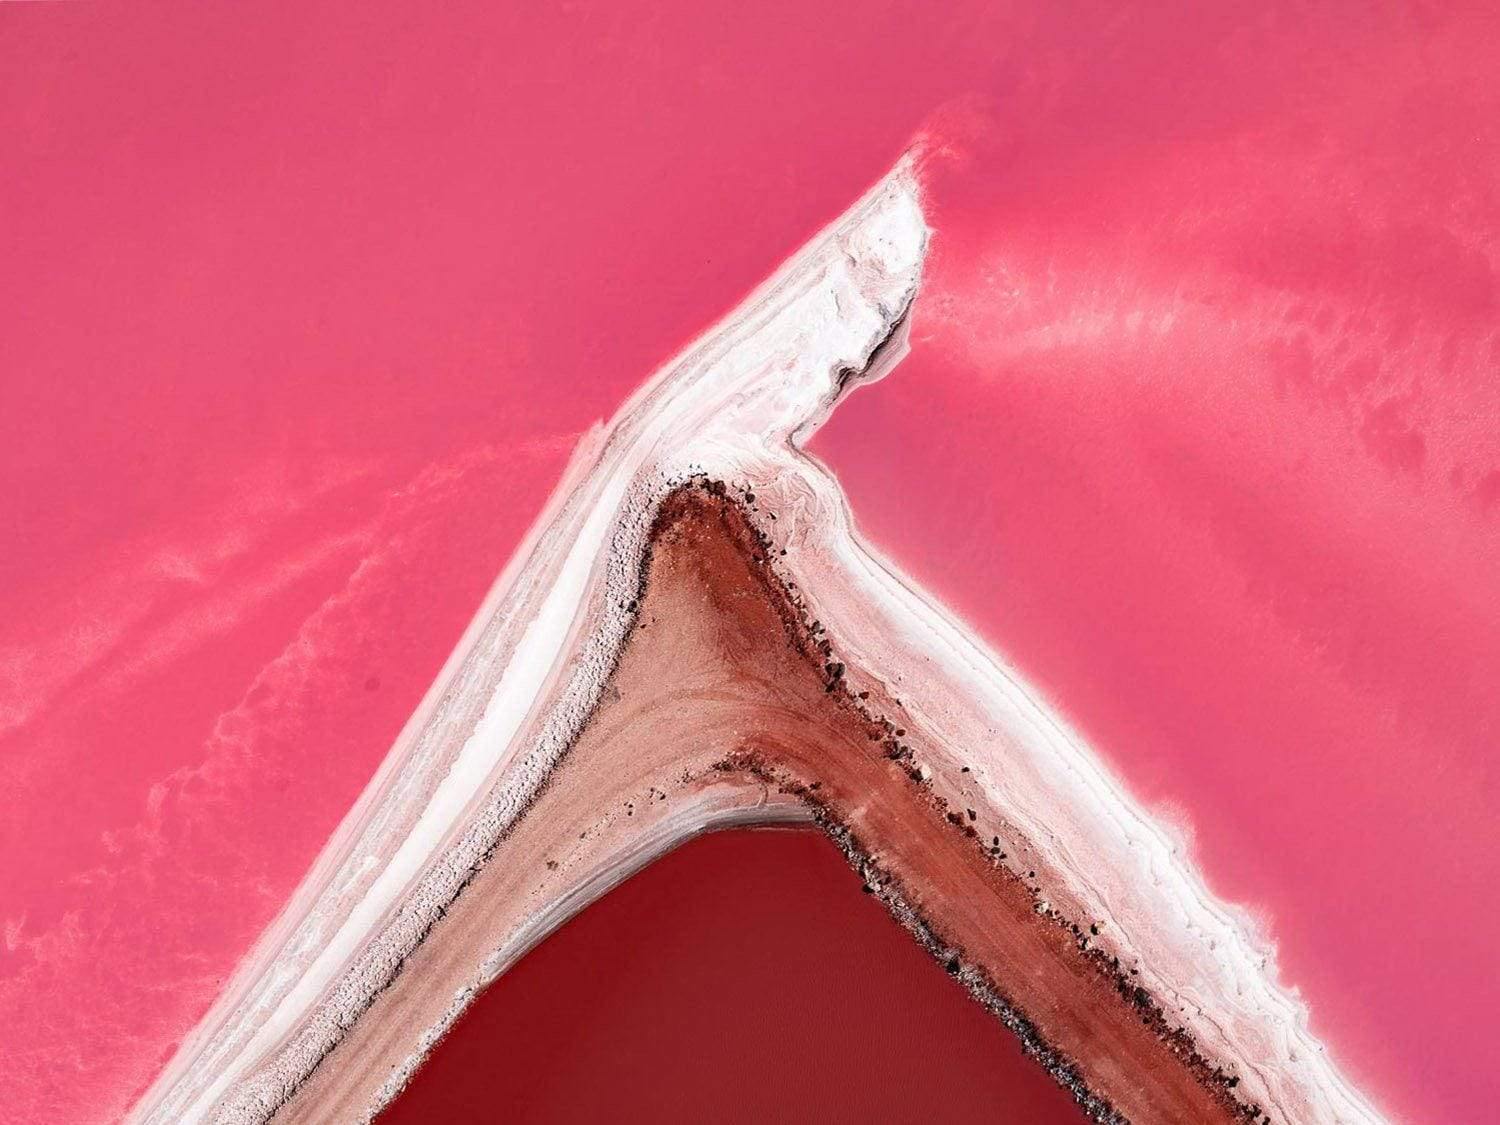 Artwork of a dark pink surface with a vanilla and chocolate lining churn on it, Ice Cream